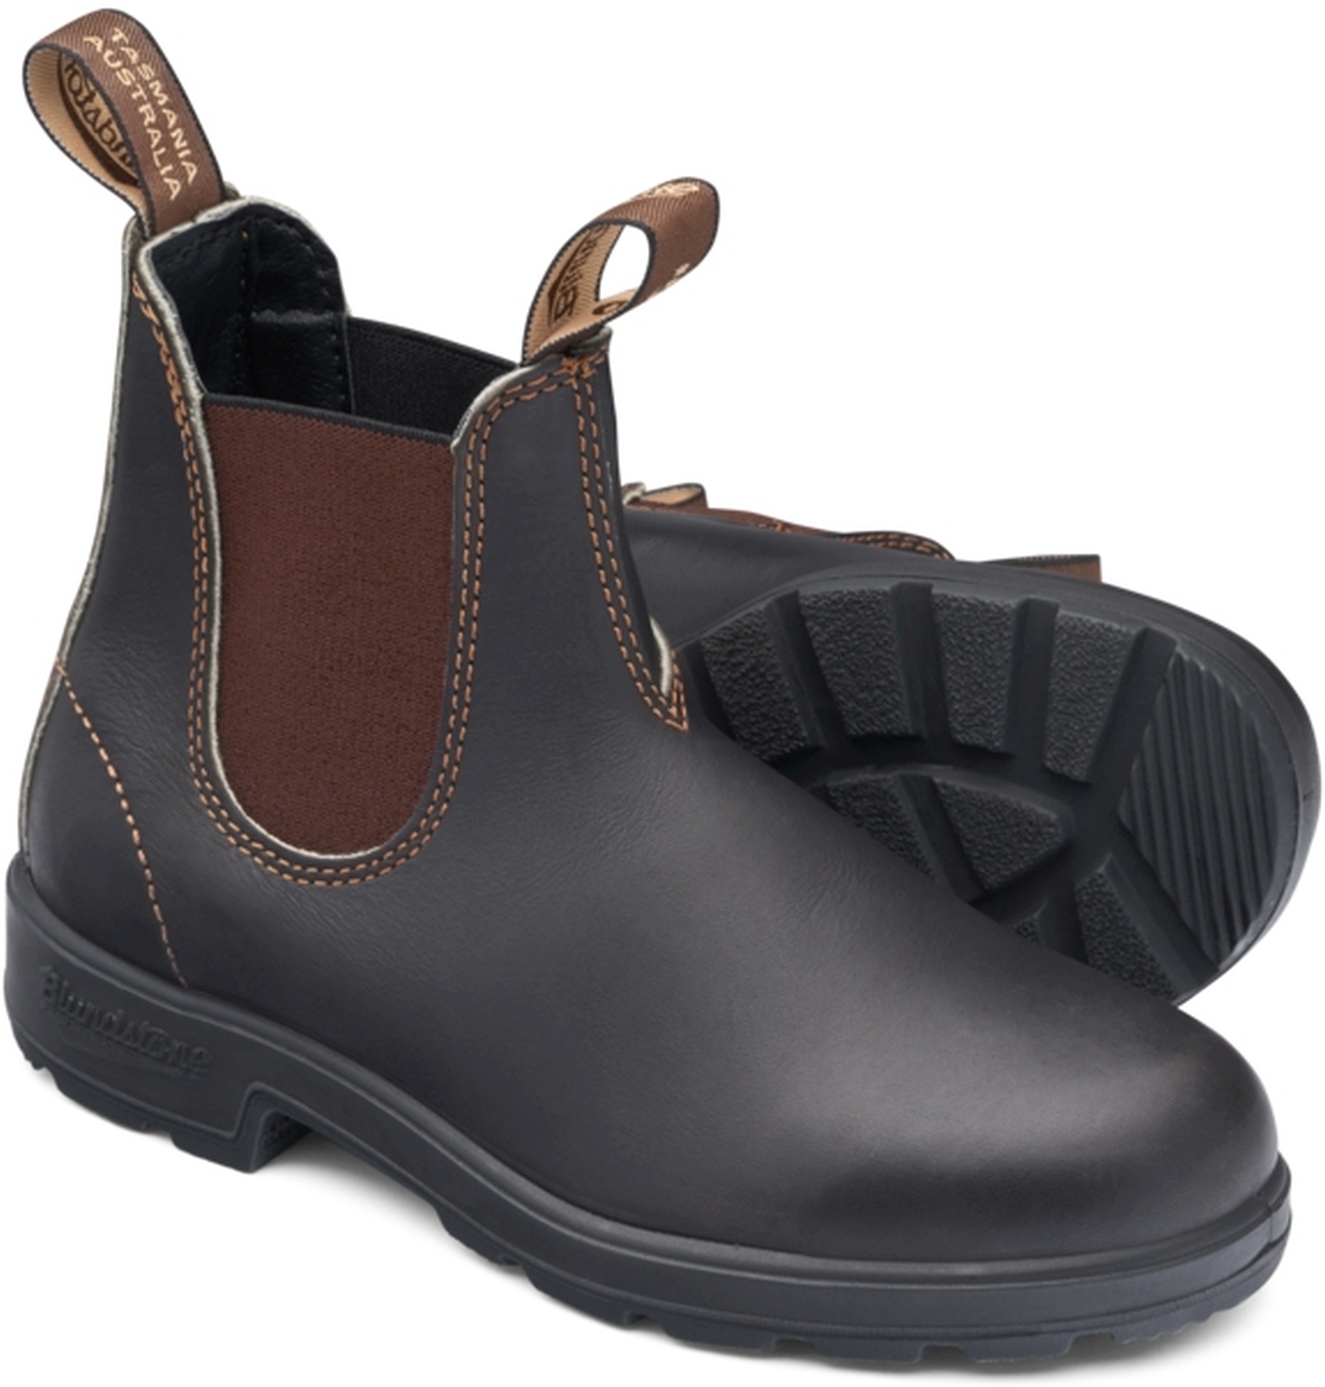 Blundstone Blundstone 500 Stout Brown Leather (500 Series) Calf leather